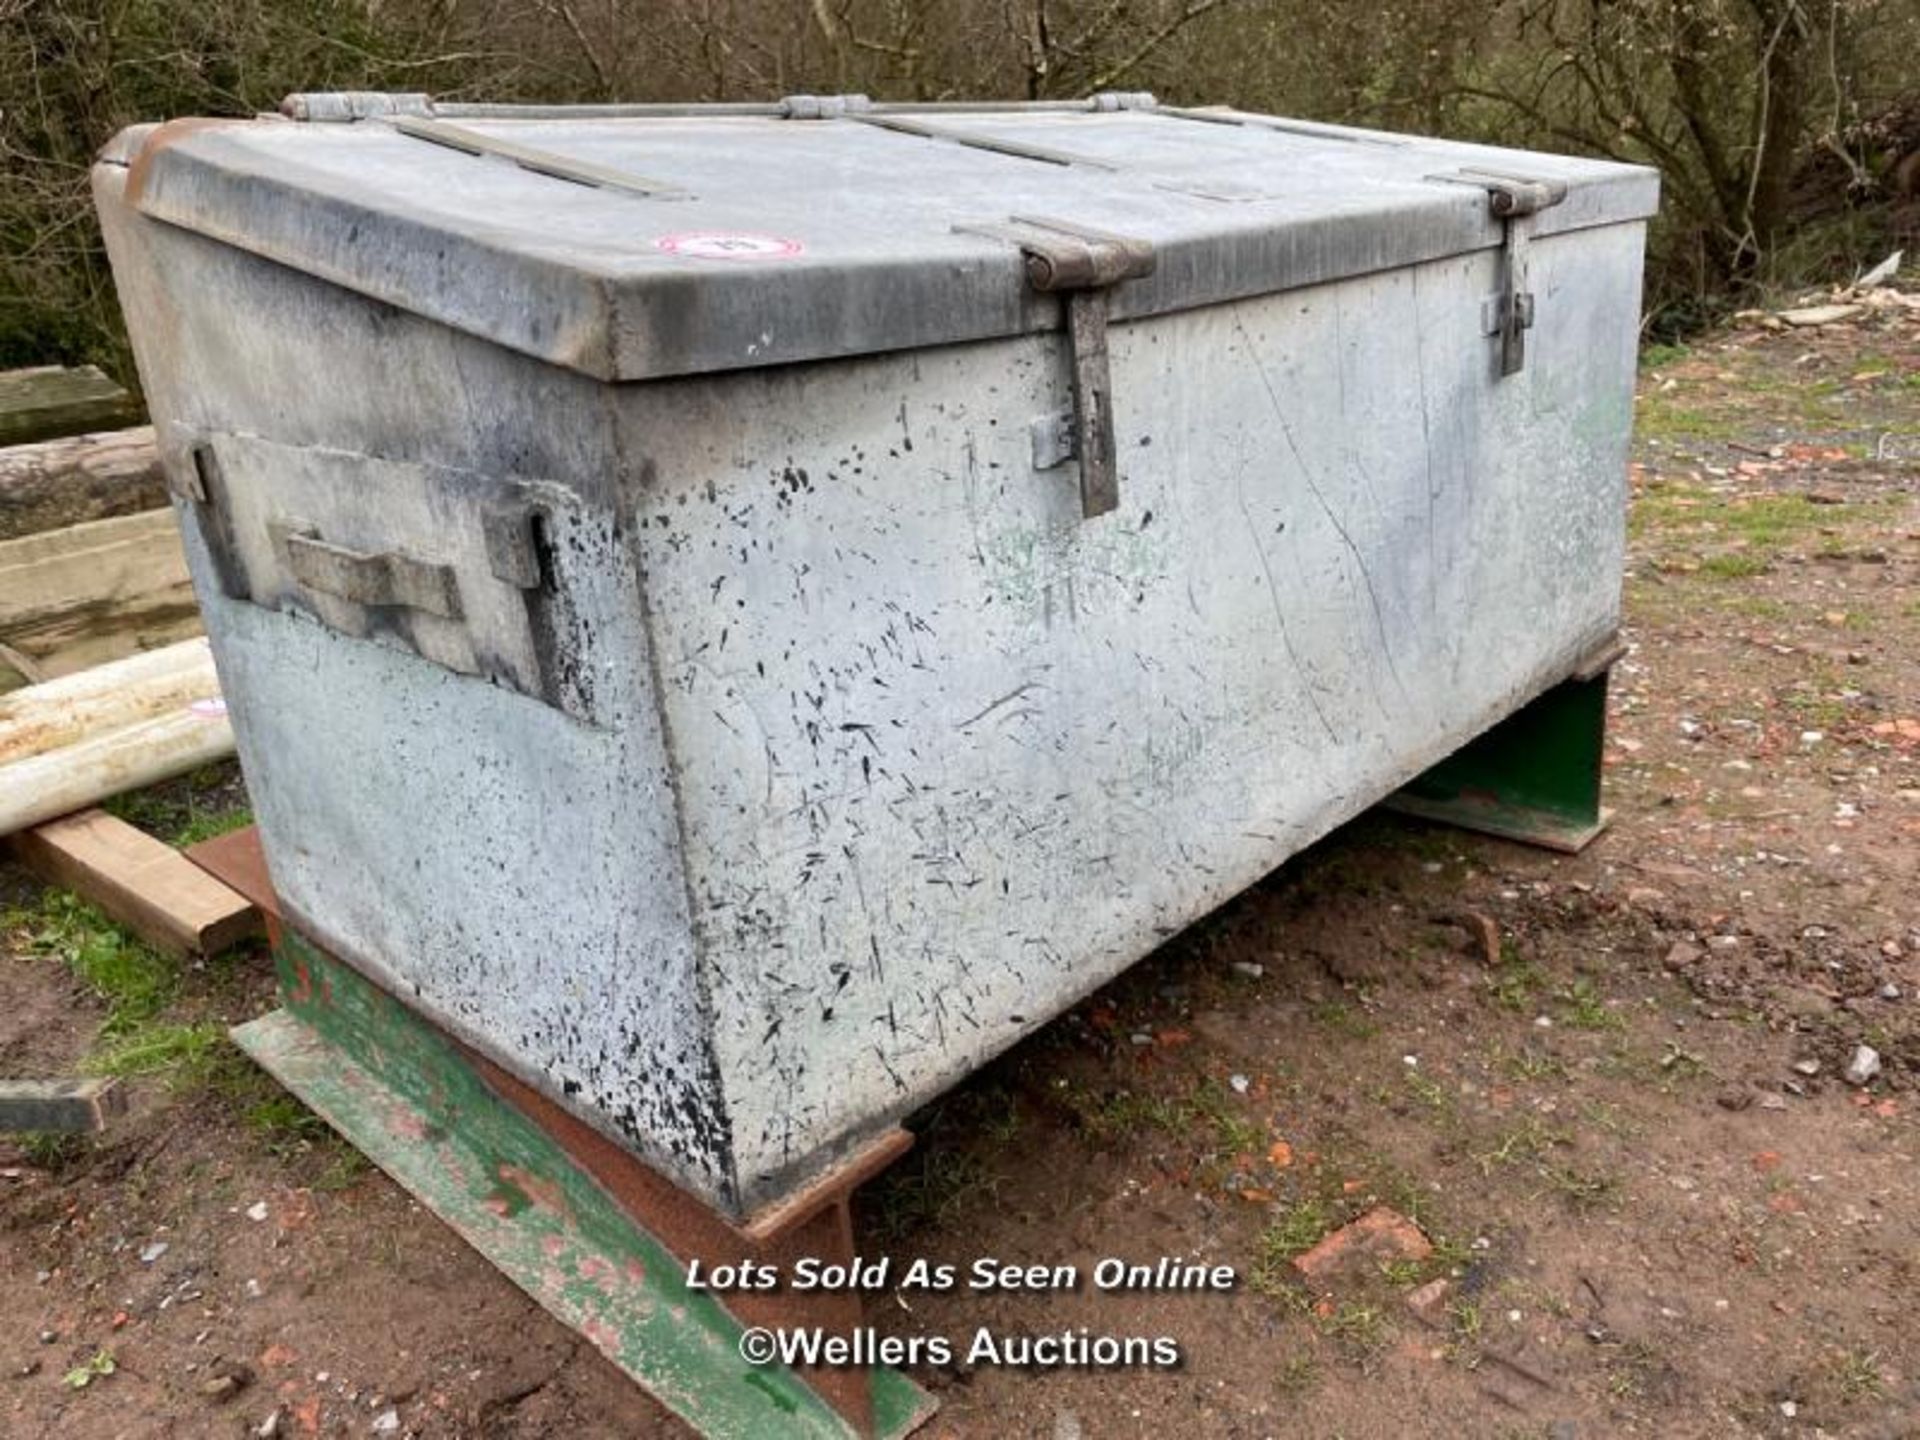 *LARGE GALVANISED FEED STORE, 30 HIGH X 60 LONG X 31 DEEP - WELDED TO RSJ / ALL LOTS ARE LOCATED